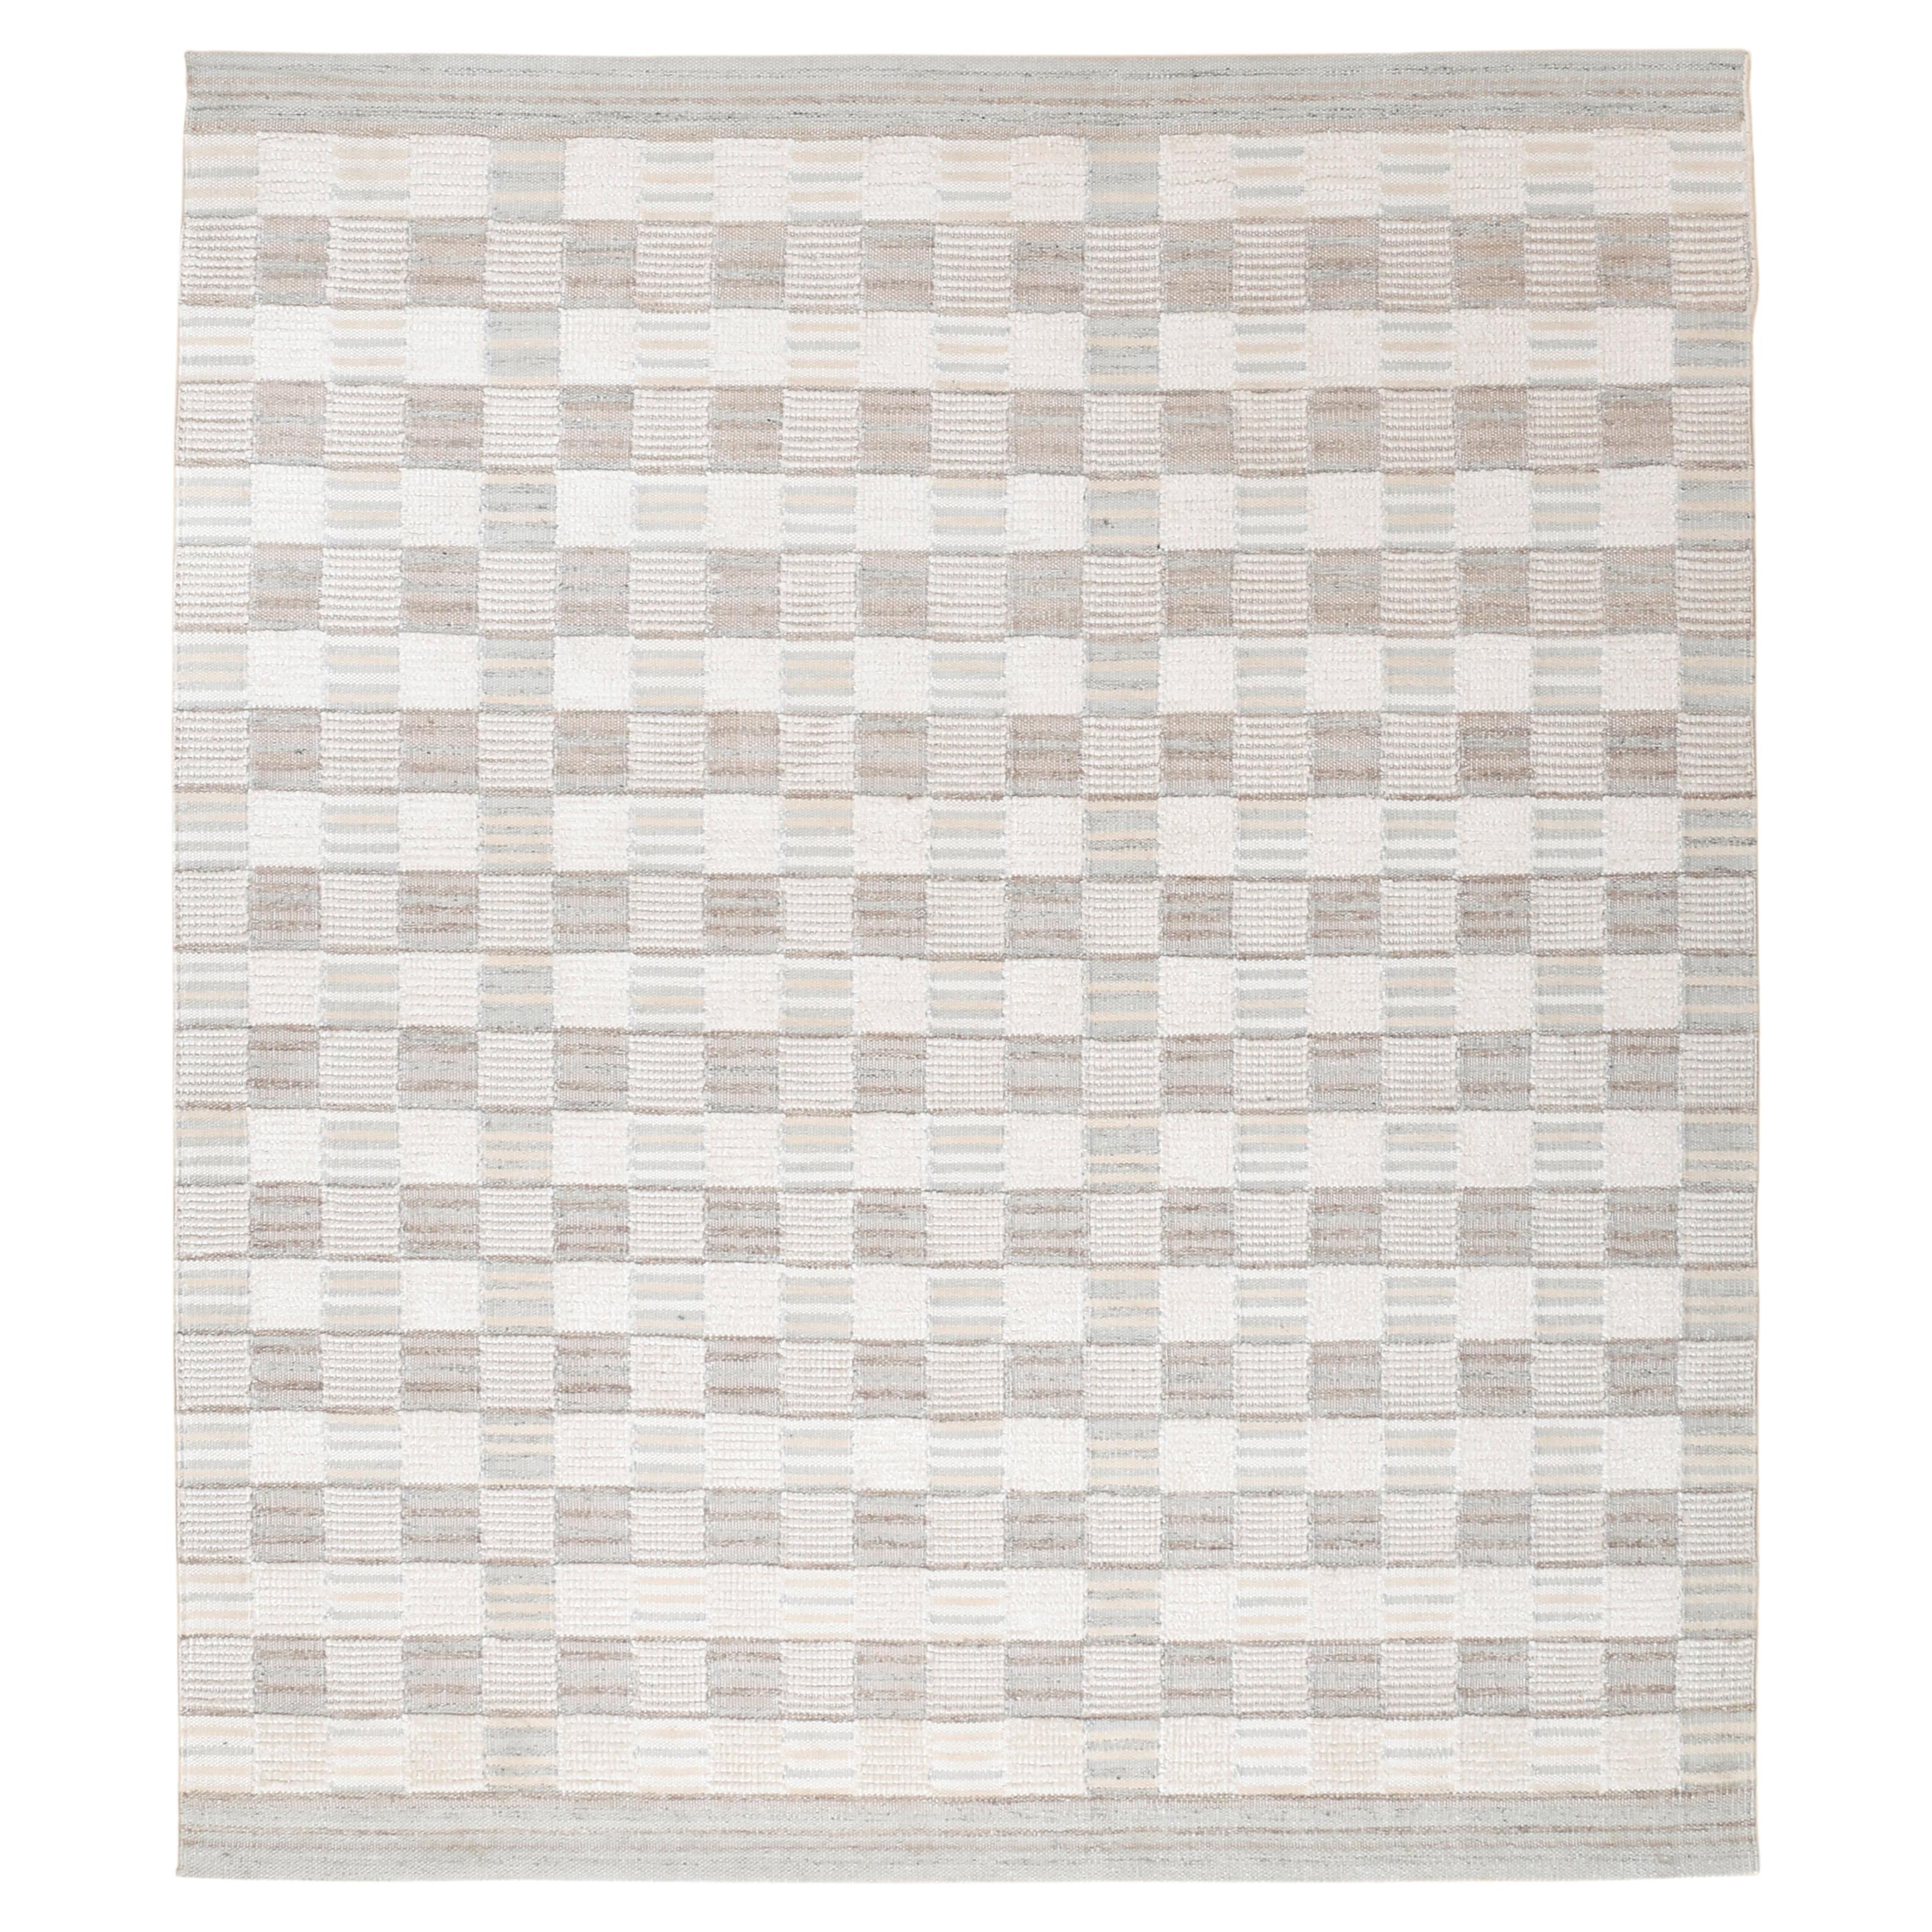 Scandinavian Modern Kilim Carpet in White, Taupe and Light Grey For Sale